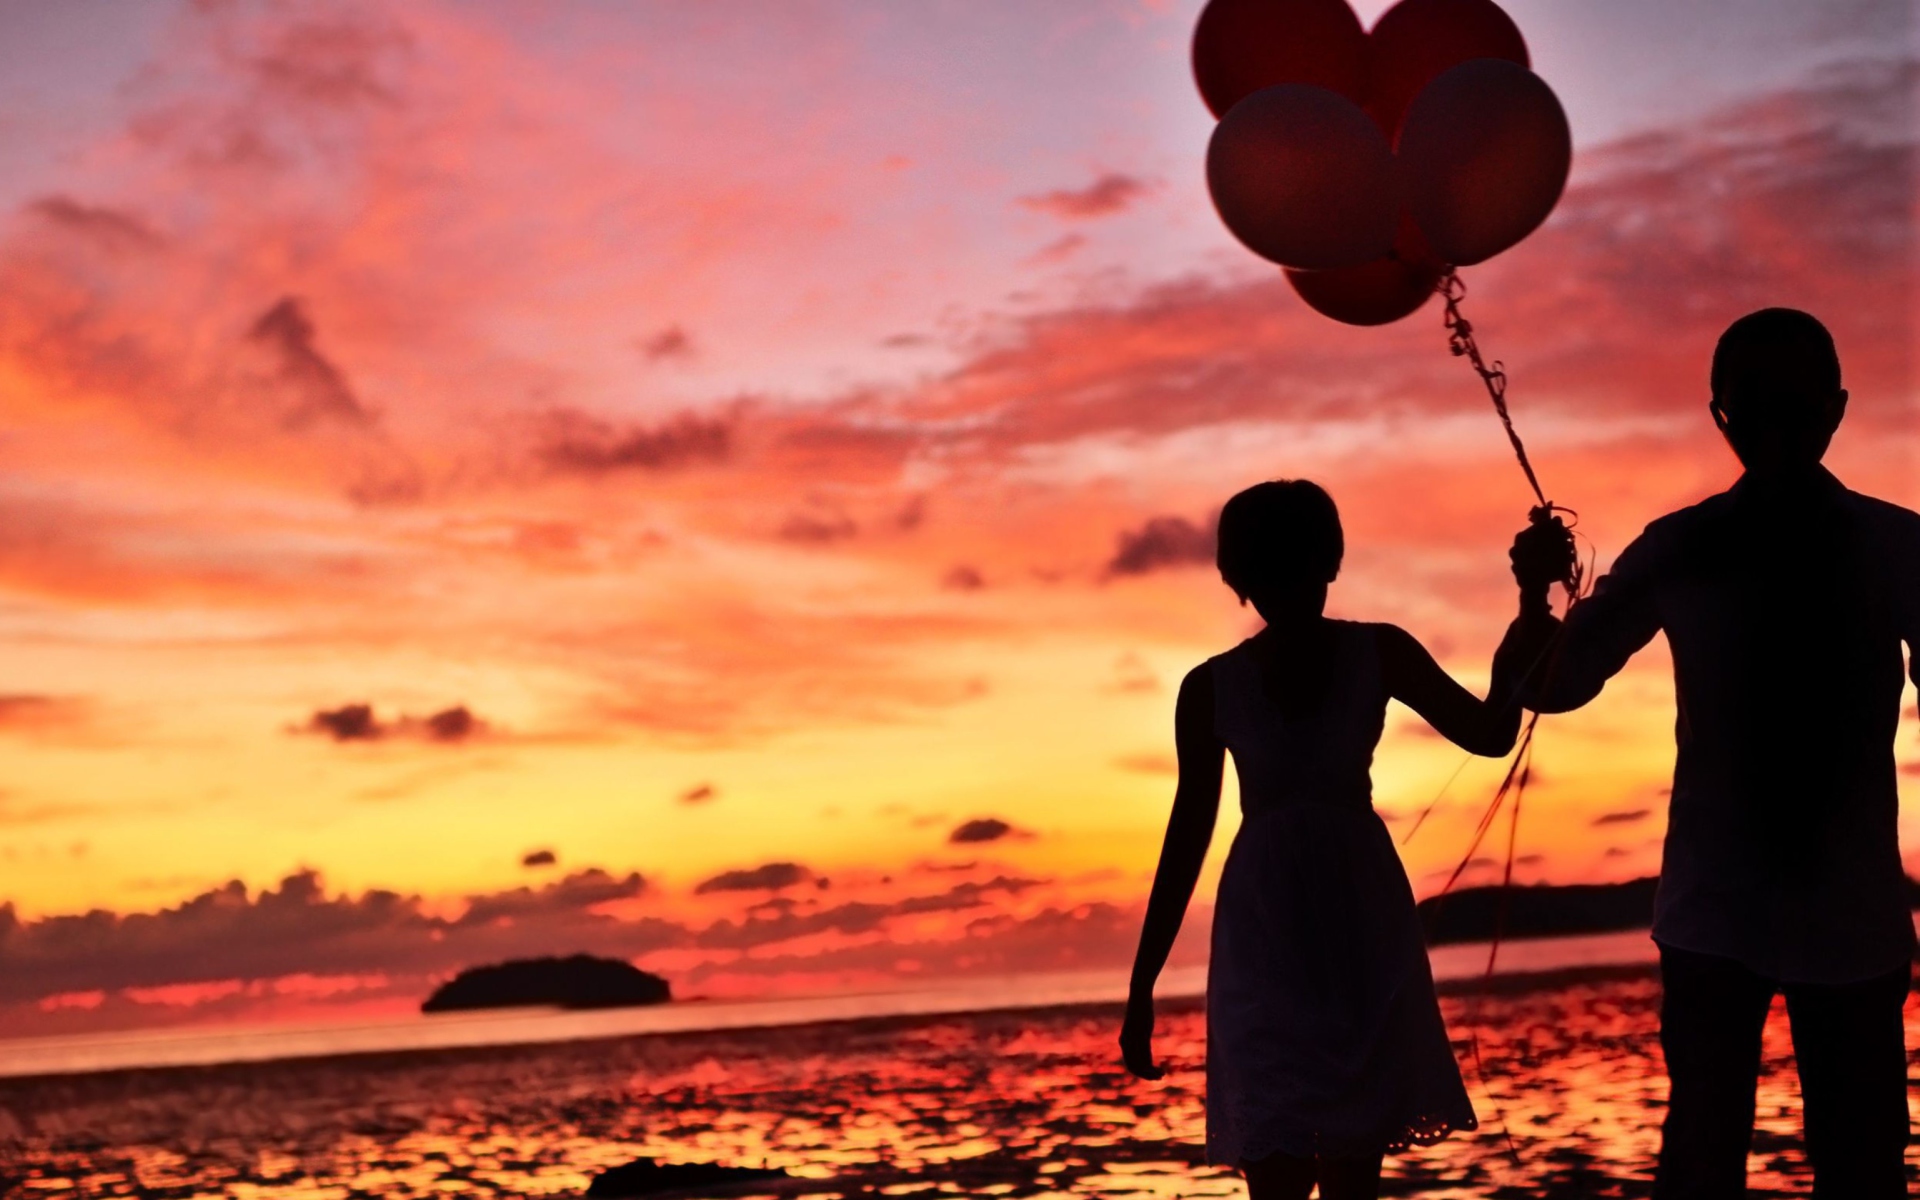 Couple With Balloons Silhouette At Sunset wallpaper 1920x1200